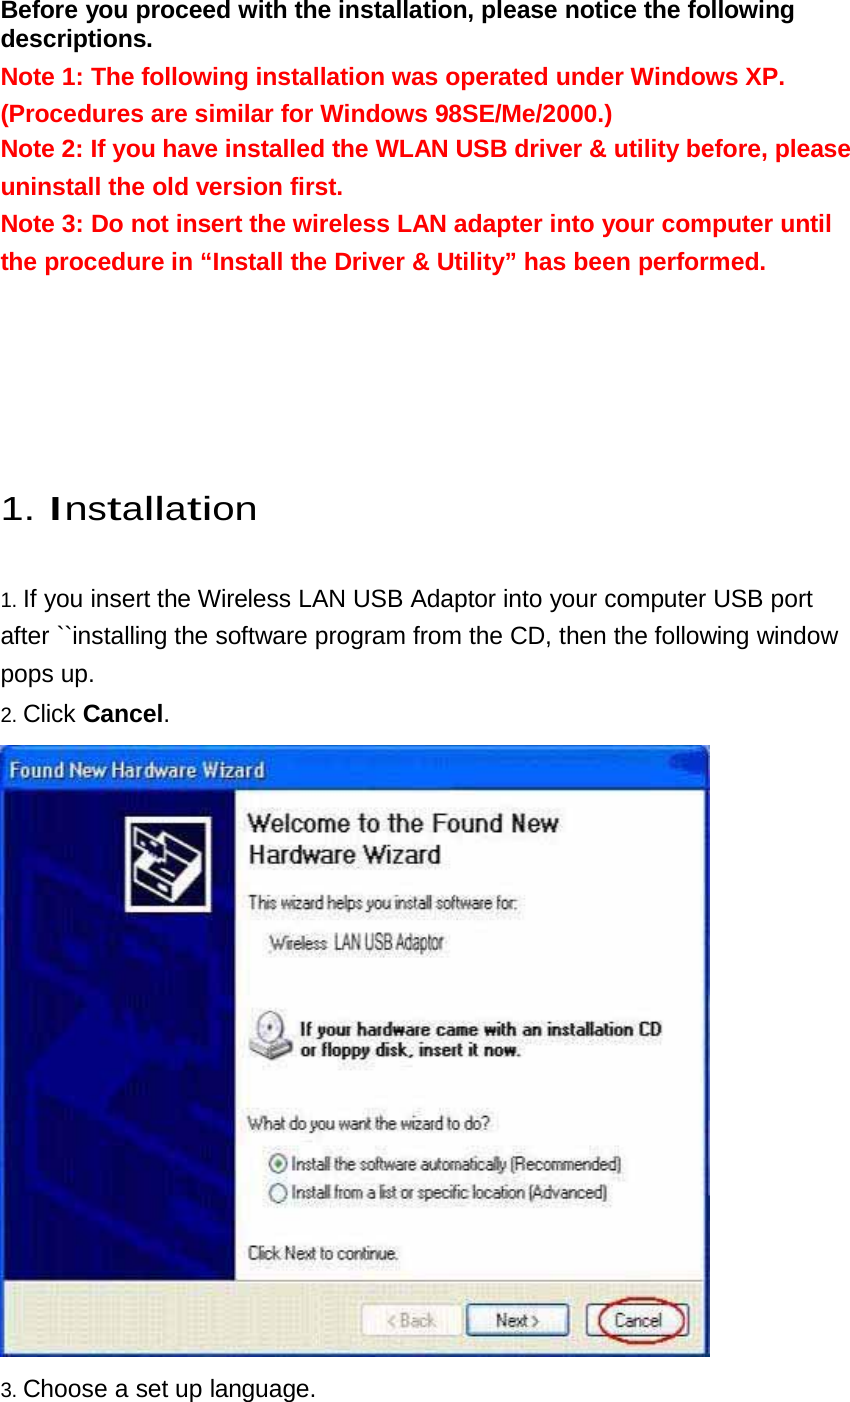 Before you proceed with the installation, please notice the following descriptions.  Note 1: The following installation was operated under Windows XP.  (Procedures are similar for Windows 98SE/Me/2000.) Note 2: If you have installed the WLAN USB driver &amp; utility before, please uninstall the old version first. Note 3: Do not insert the wireless LAN adapter into your computer until the procedure in “Install the Driver &amp; Utility” has been performed.           1. Installation   1. If you insert the Wireless LAN USB Adaptor into your computer USB port after ``installing the software program from the CD, then the following window pops up.  2. Click Cancel.    3. Choose a set up language. 